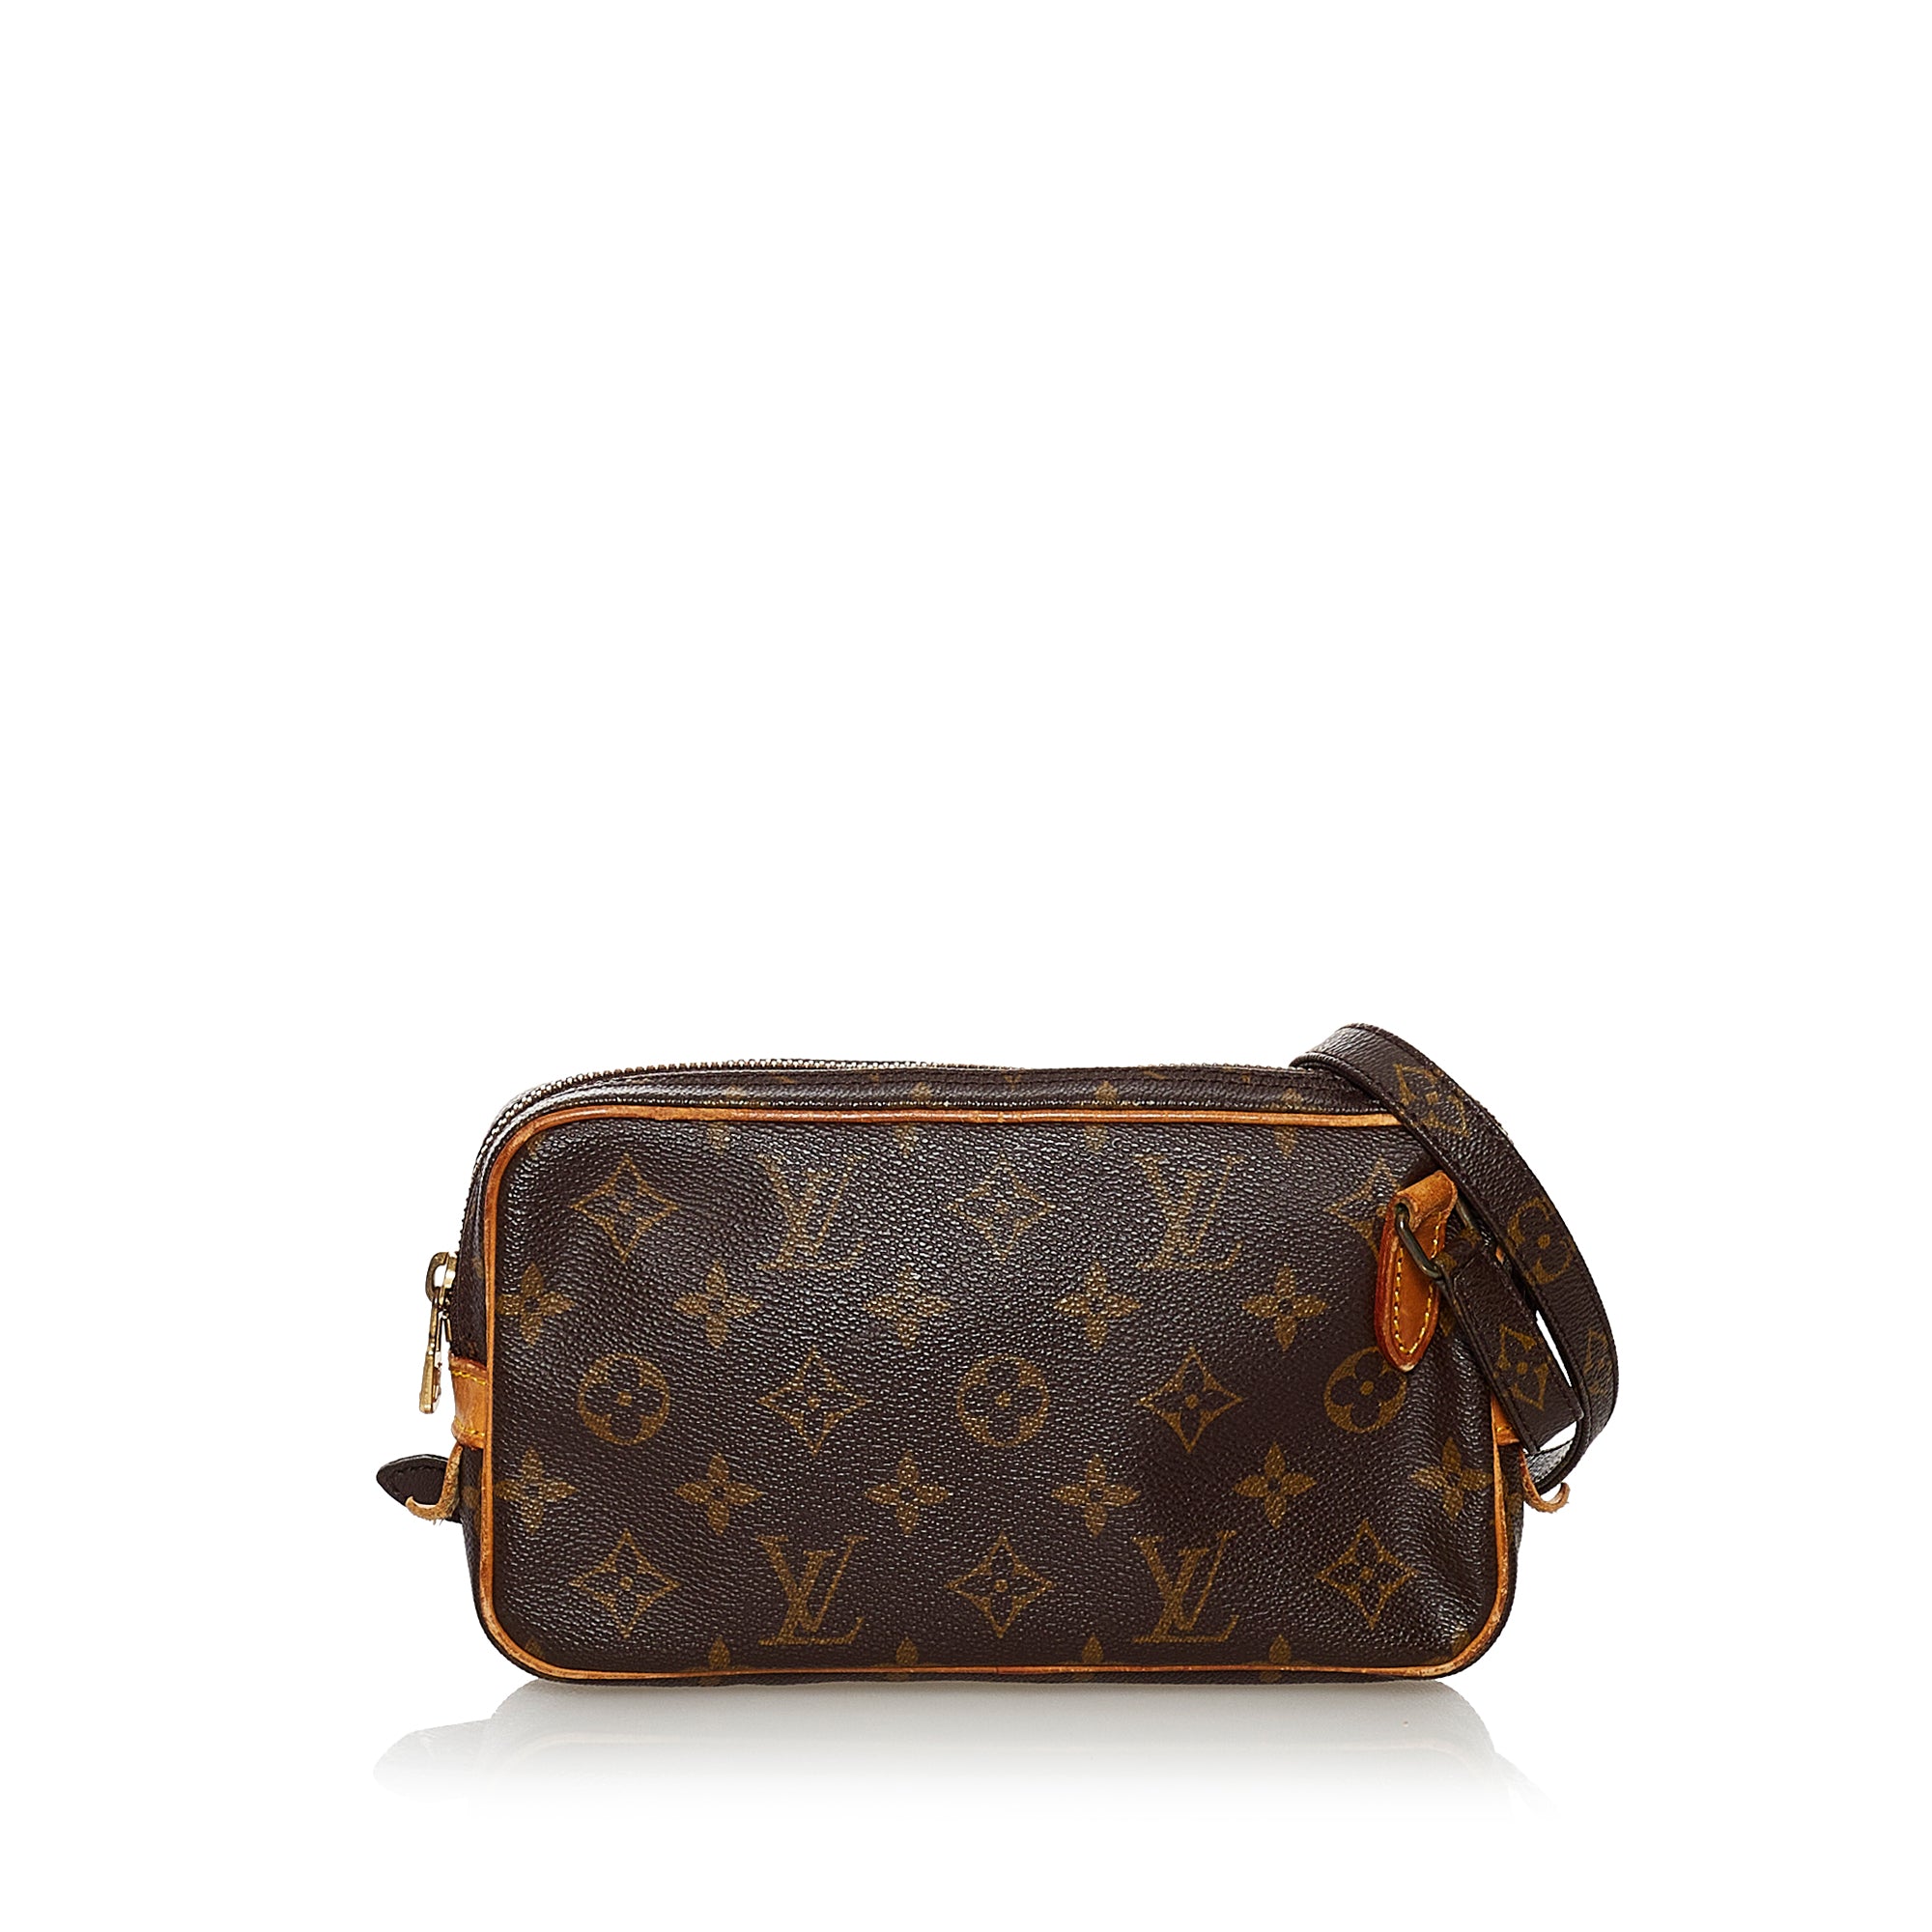 Louis Vuitton Vintage Monogram Marly Bandouliere Crossbody Bag at